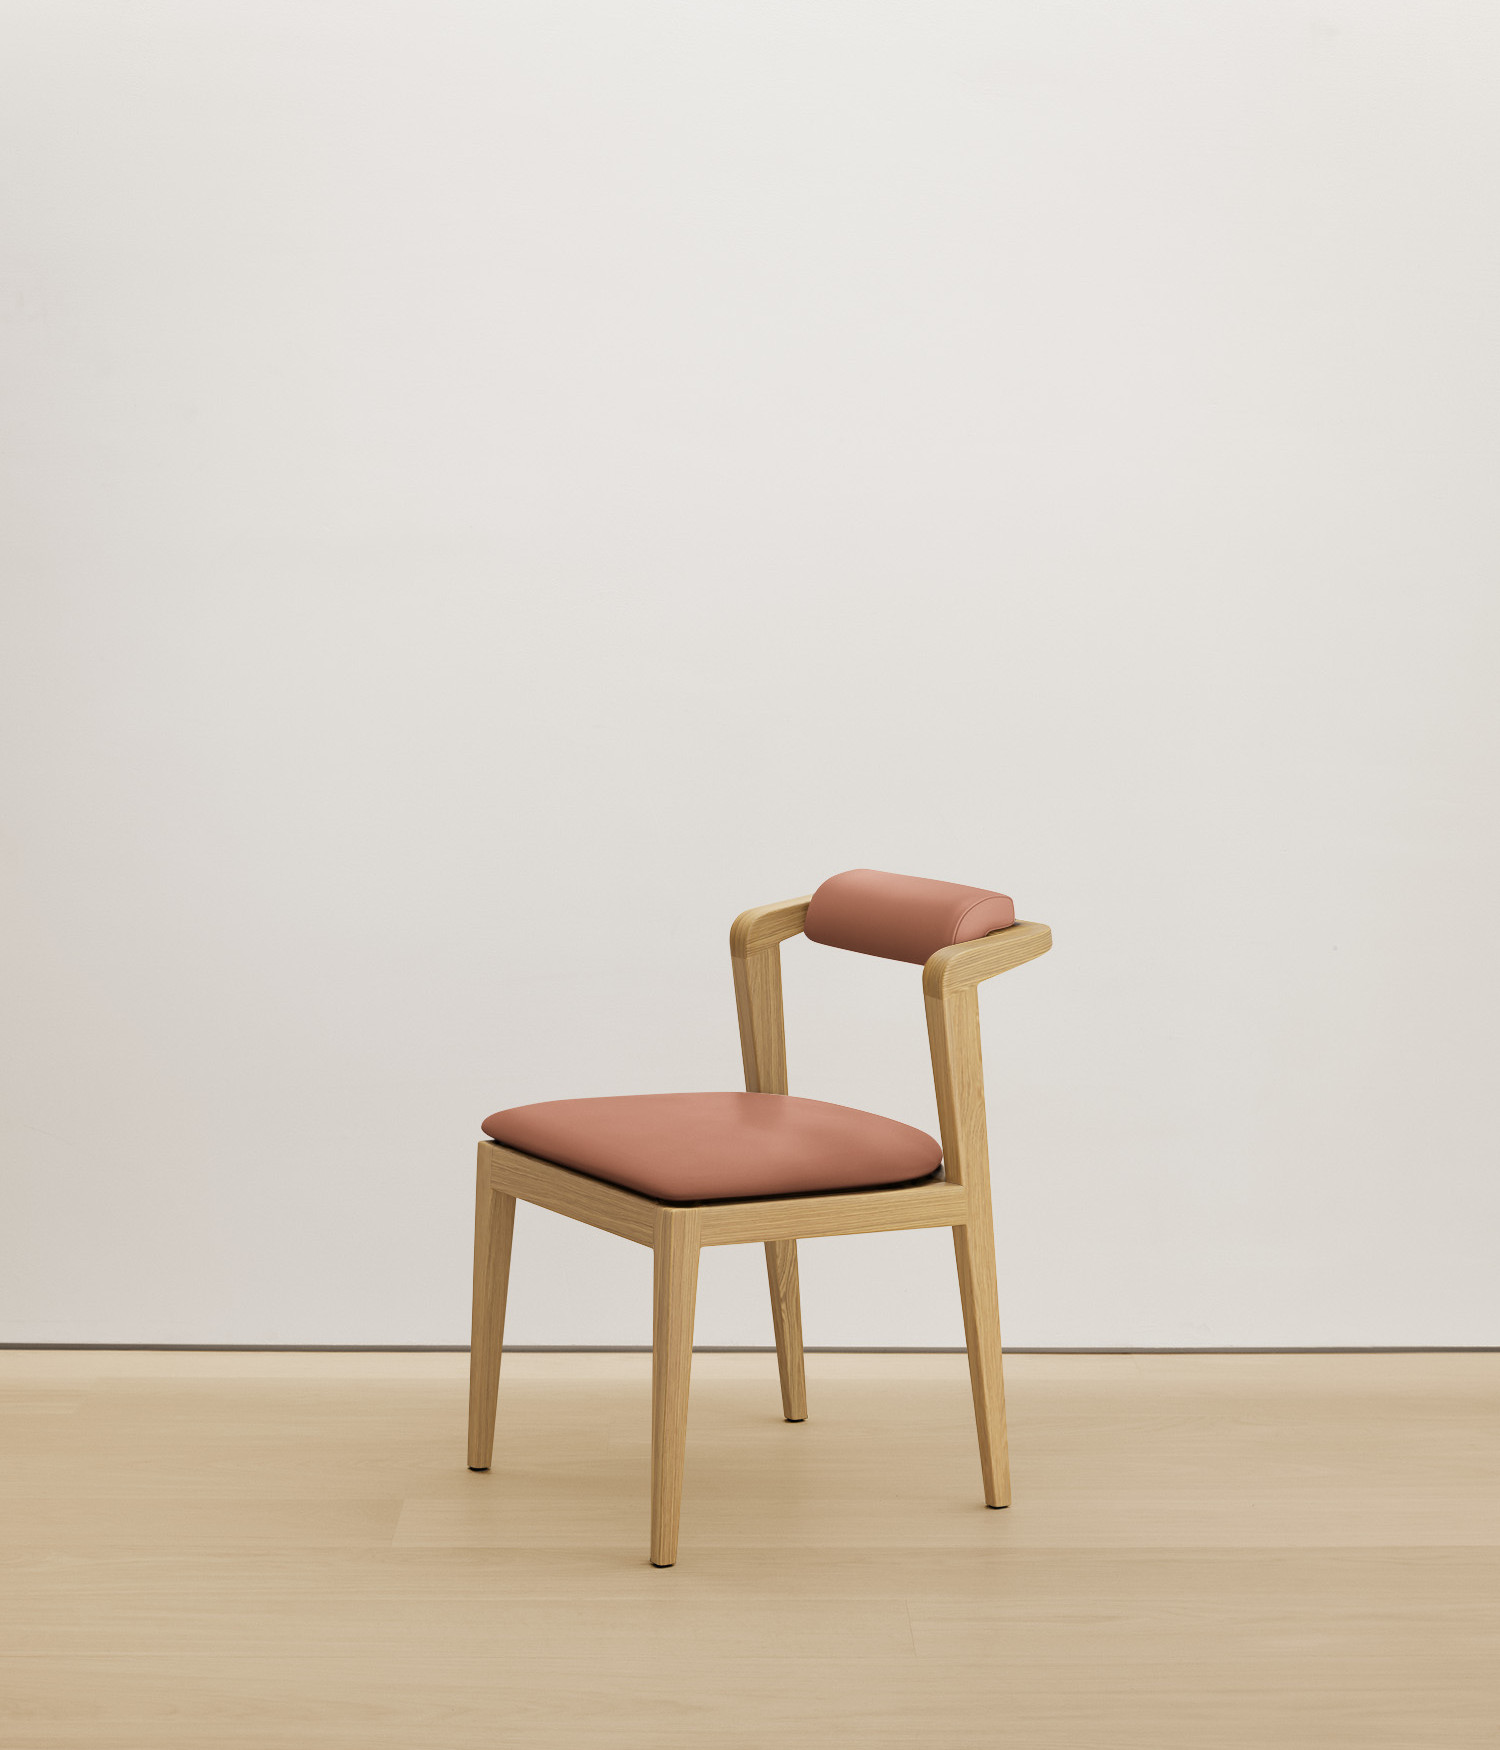  white-oak chair with  color upholstered seat